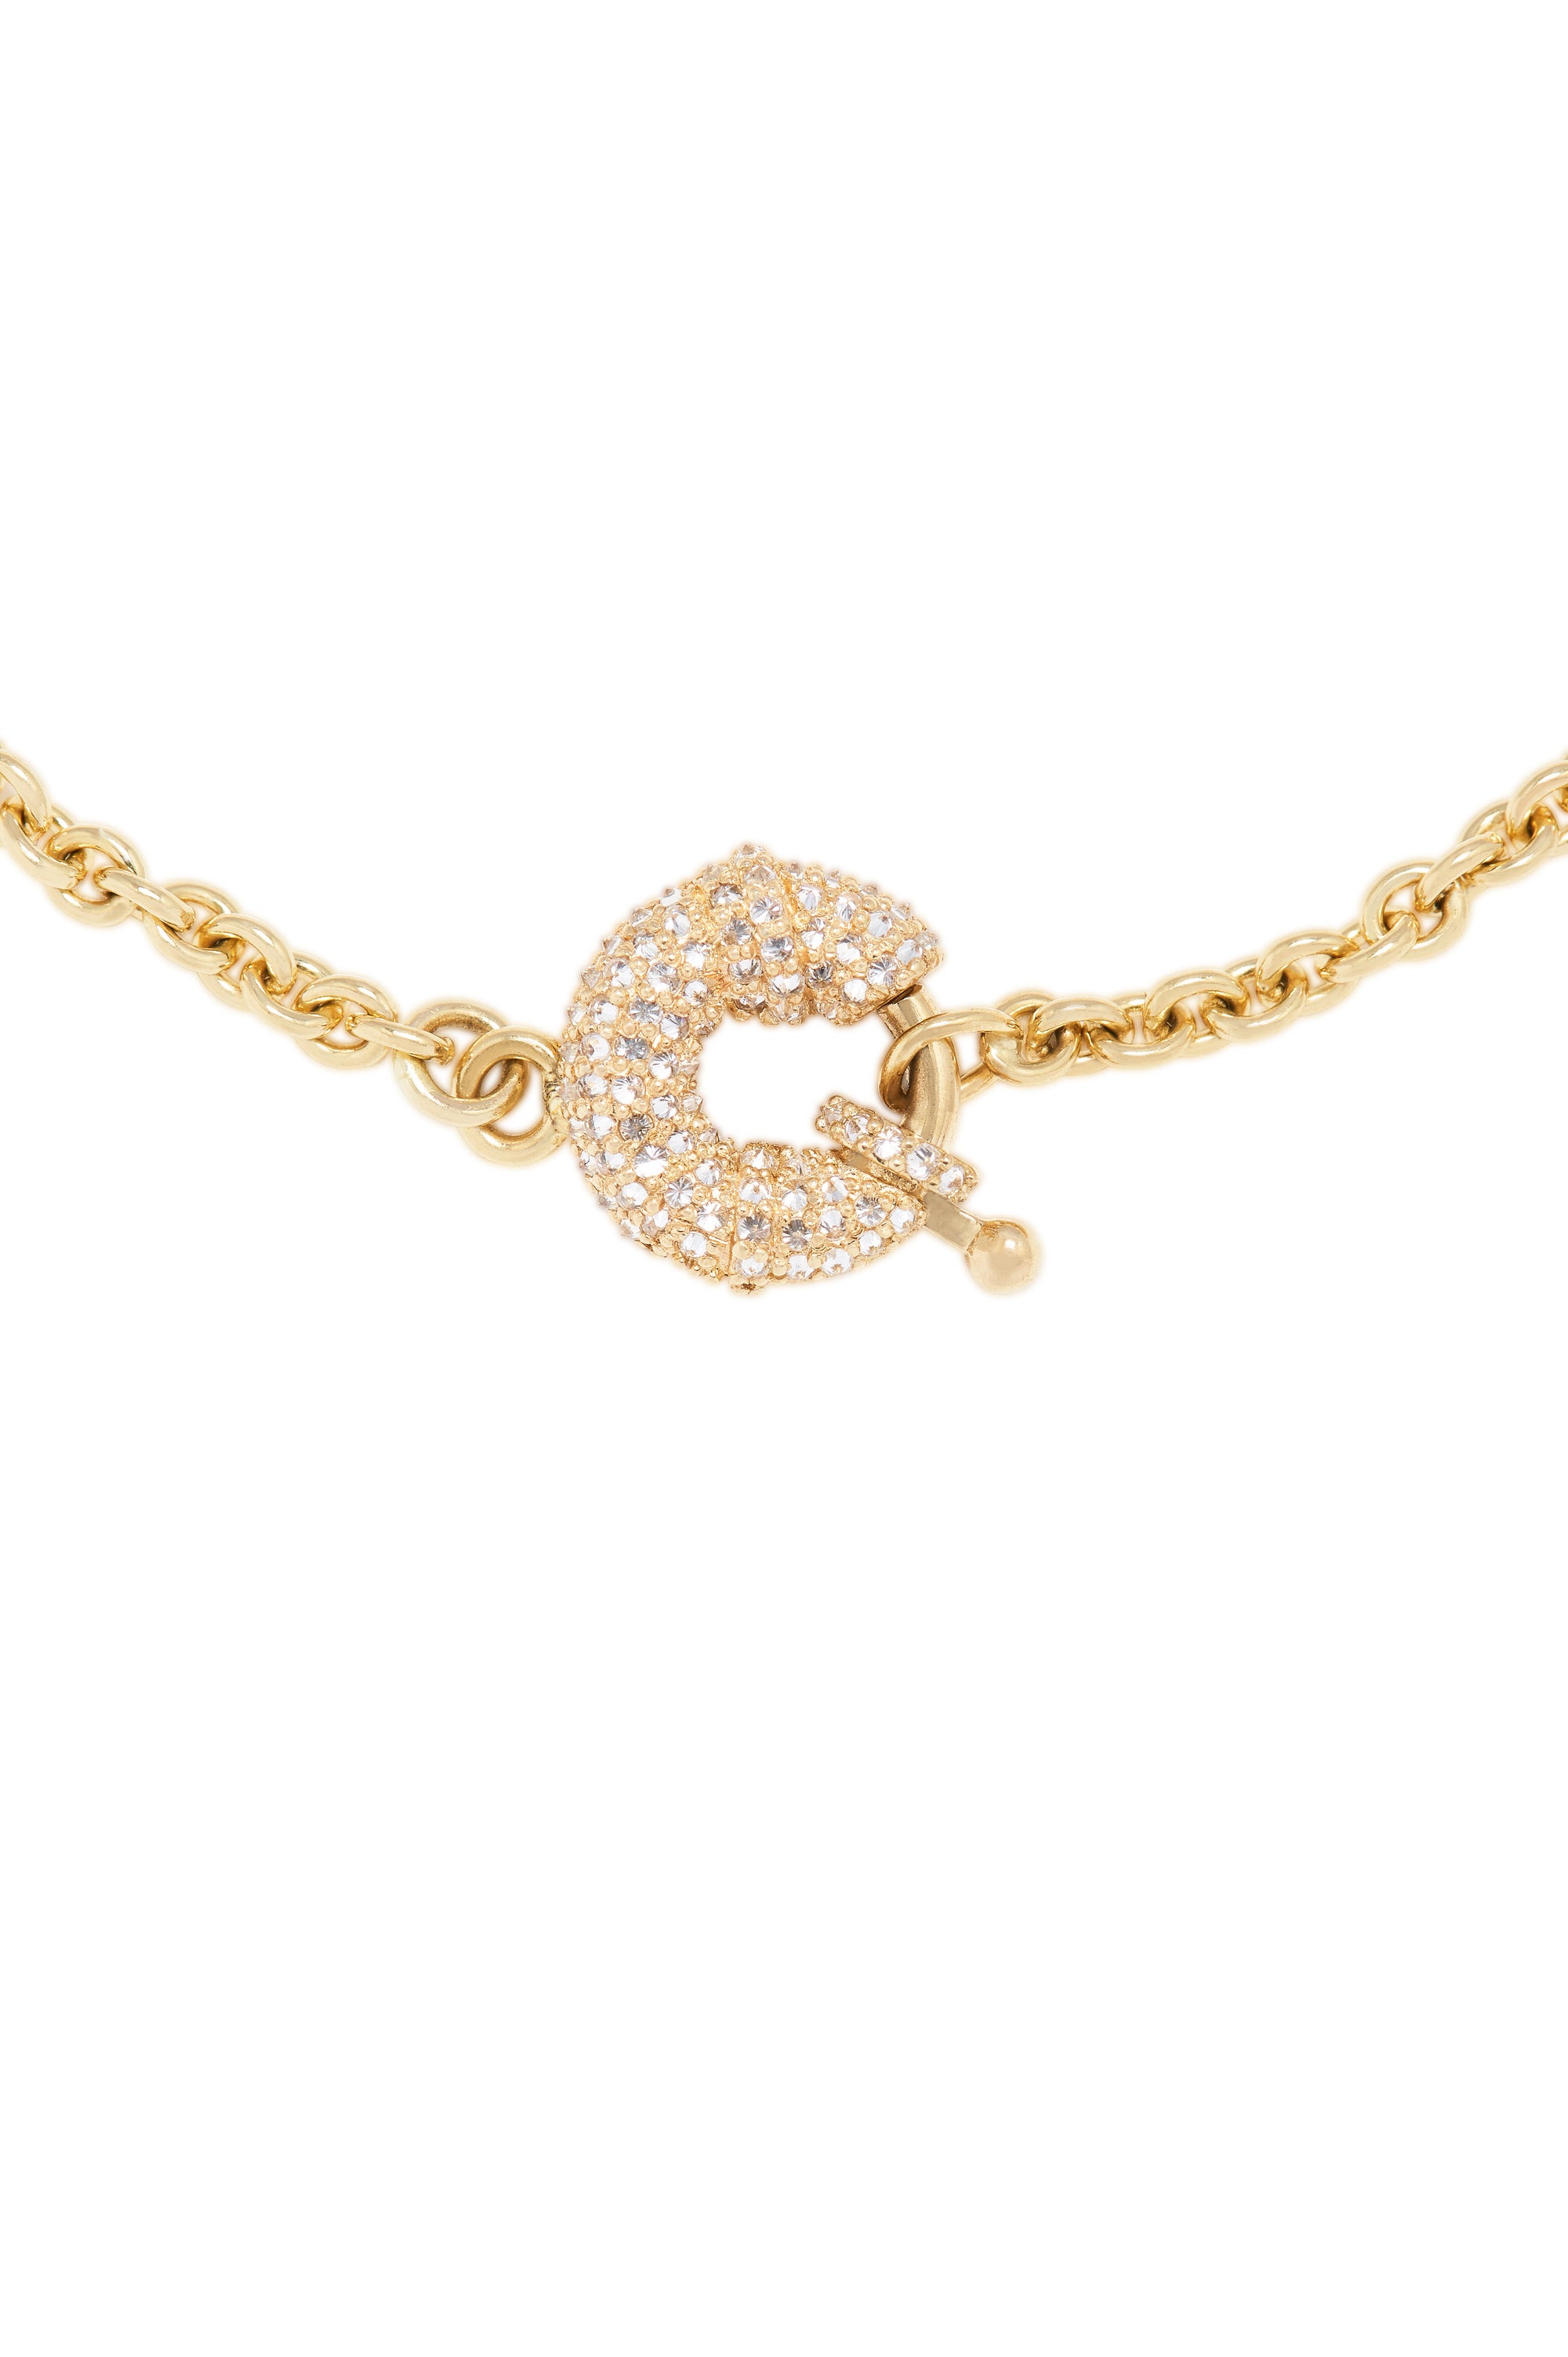 Diamond spring ring clasp bracelet cable chain 18K gold